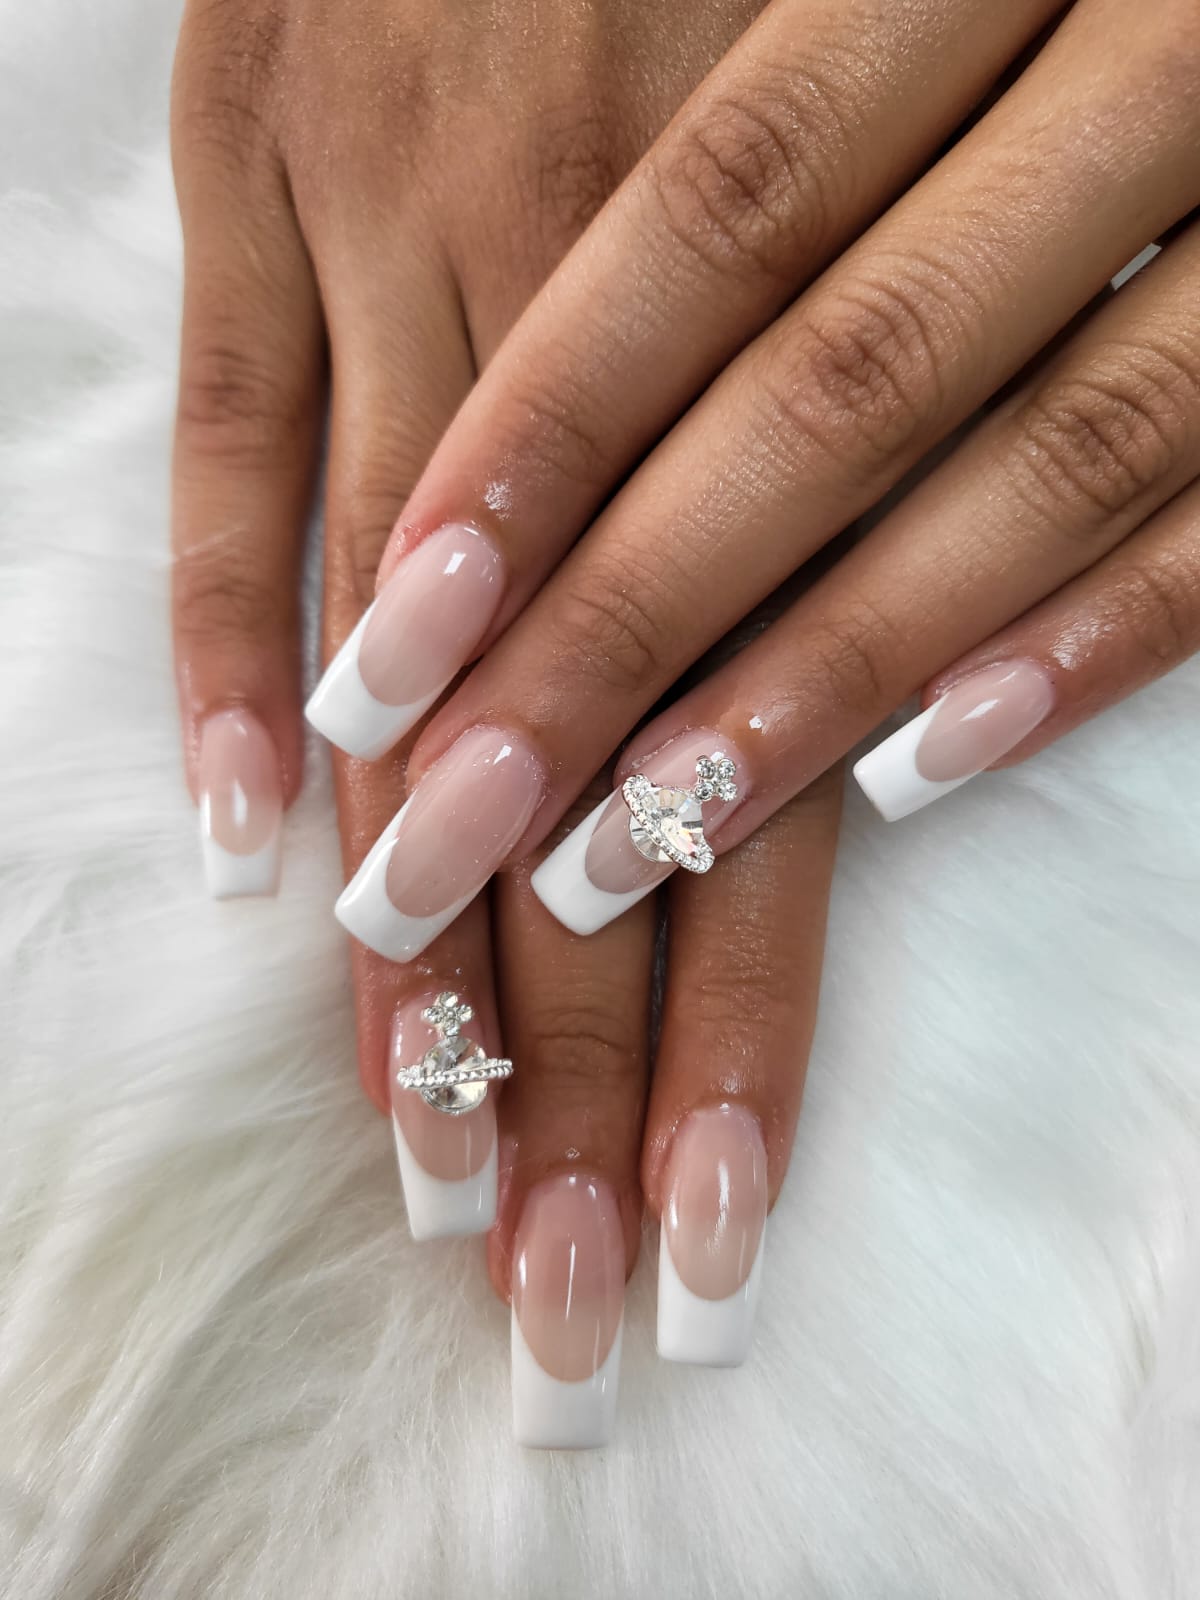 Manicures in Bromley, London - Treatwell